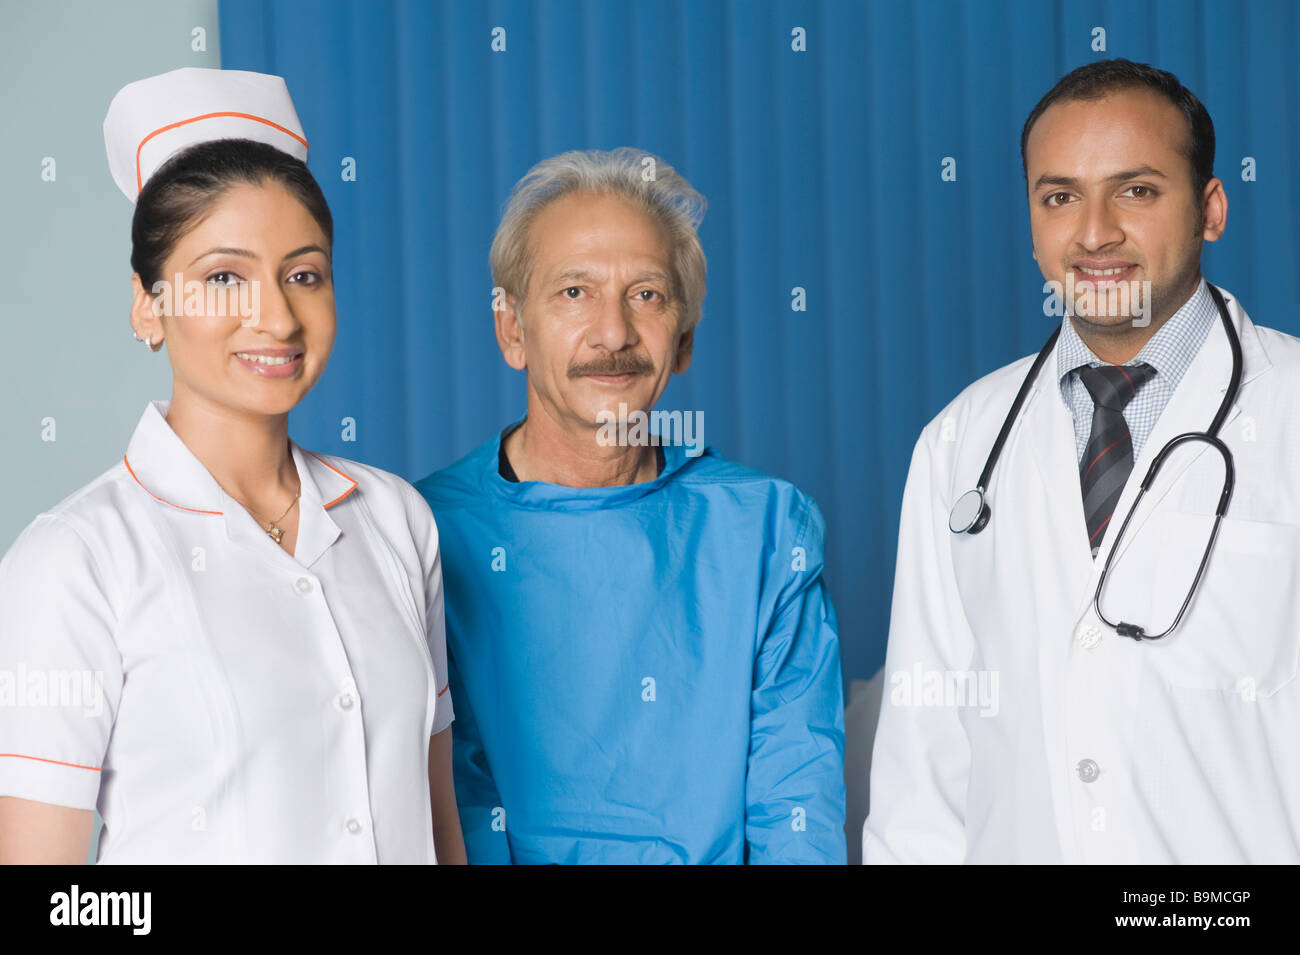 Portrait of doctors smiling with a patient Stock Photo